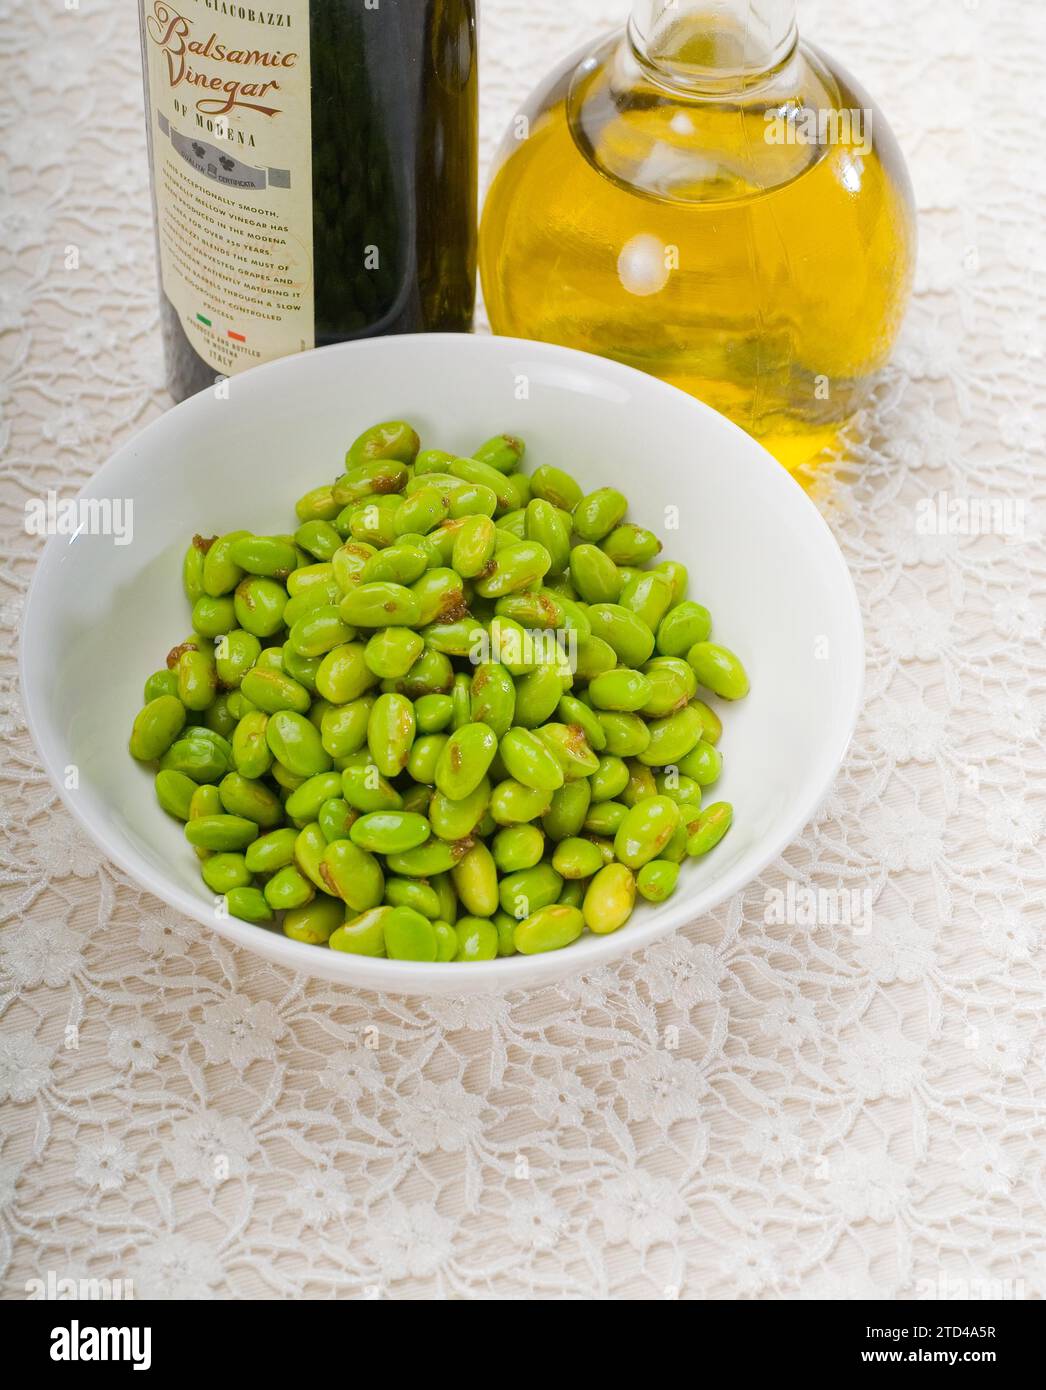 Steamed fresh green beans with extra virgin olive oil and balsamic vinegar, Food photography Stock Photo